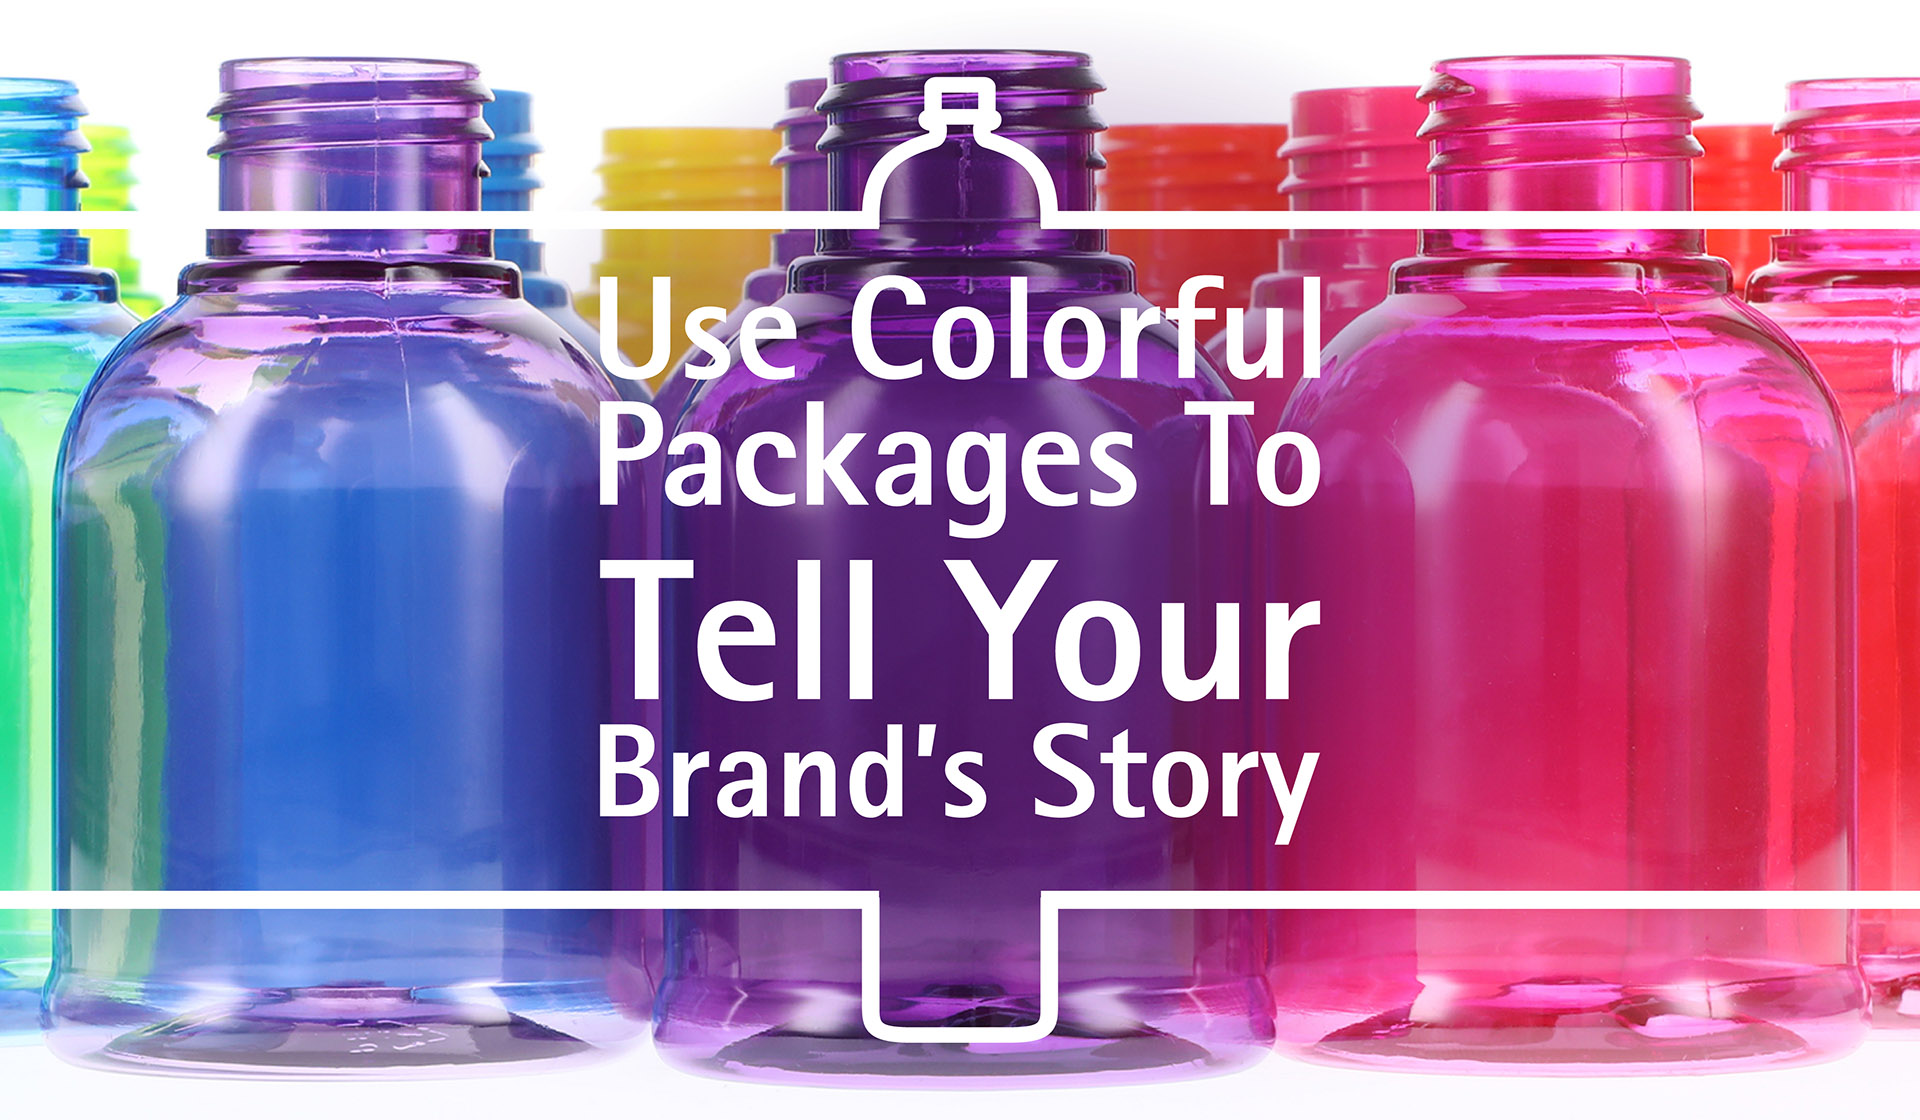 Use Colorful Packages To Tell Your Brand’s Story